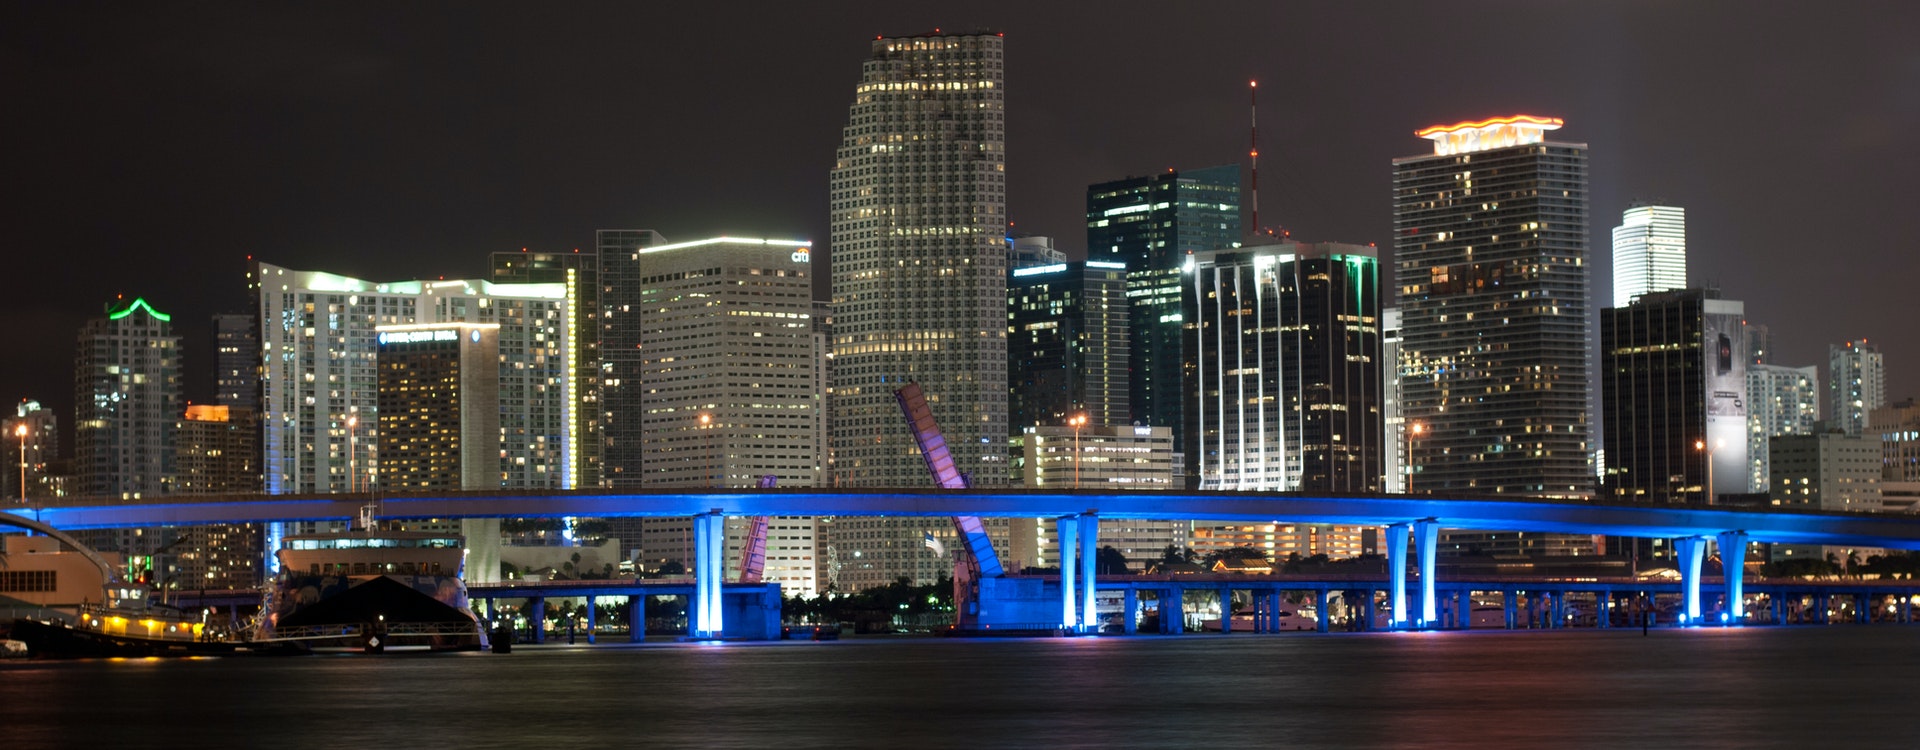 Taking the GMAT in Miami